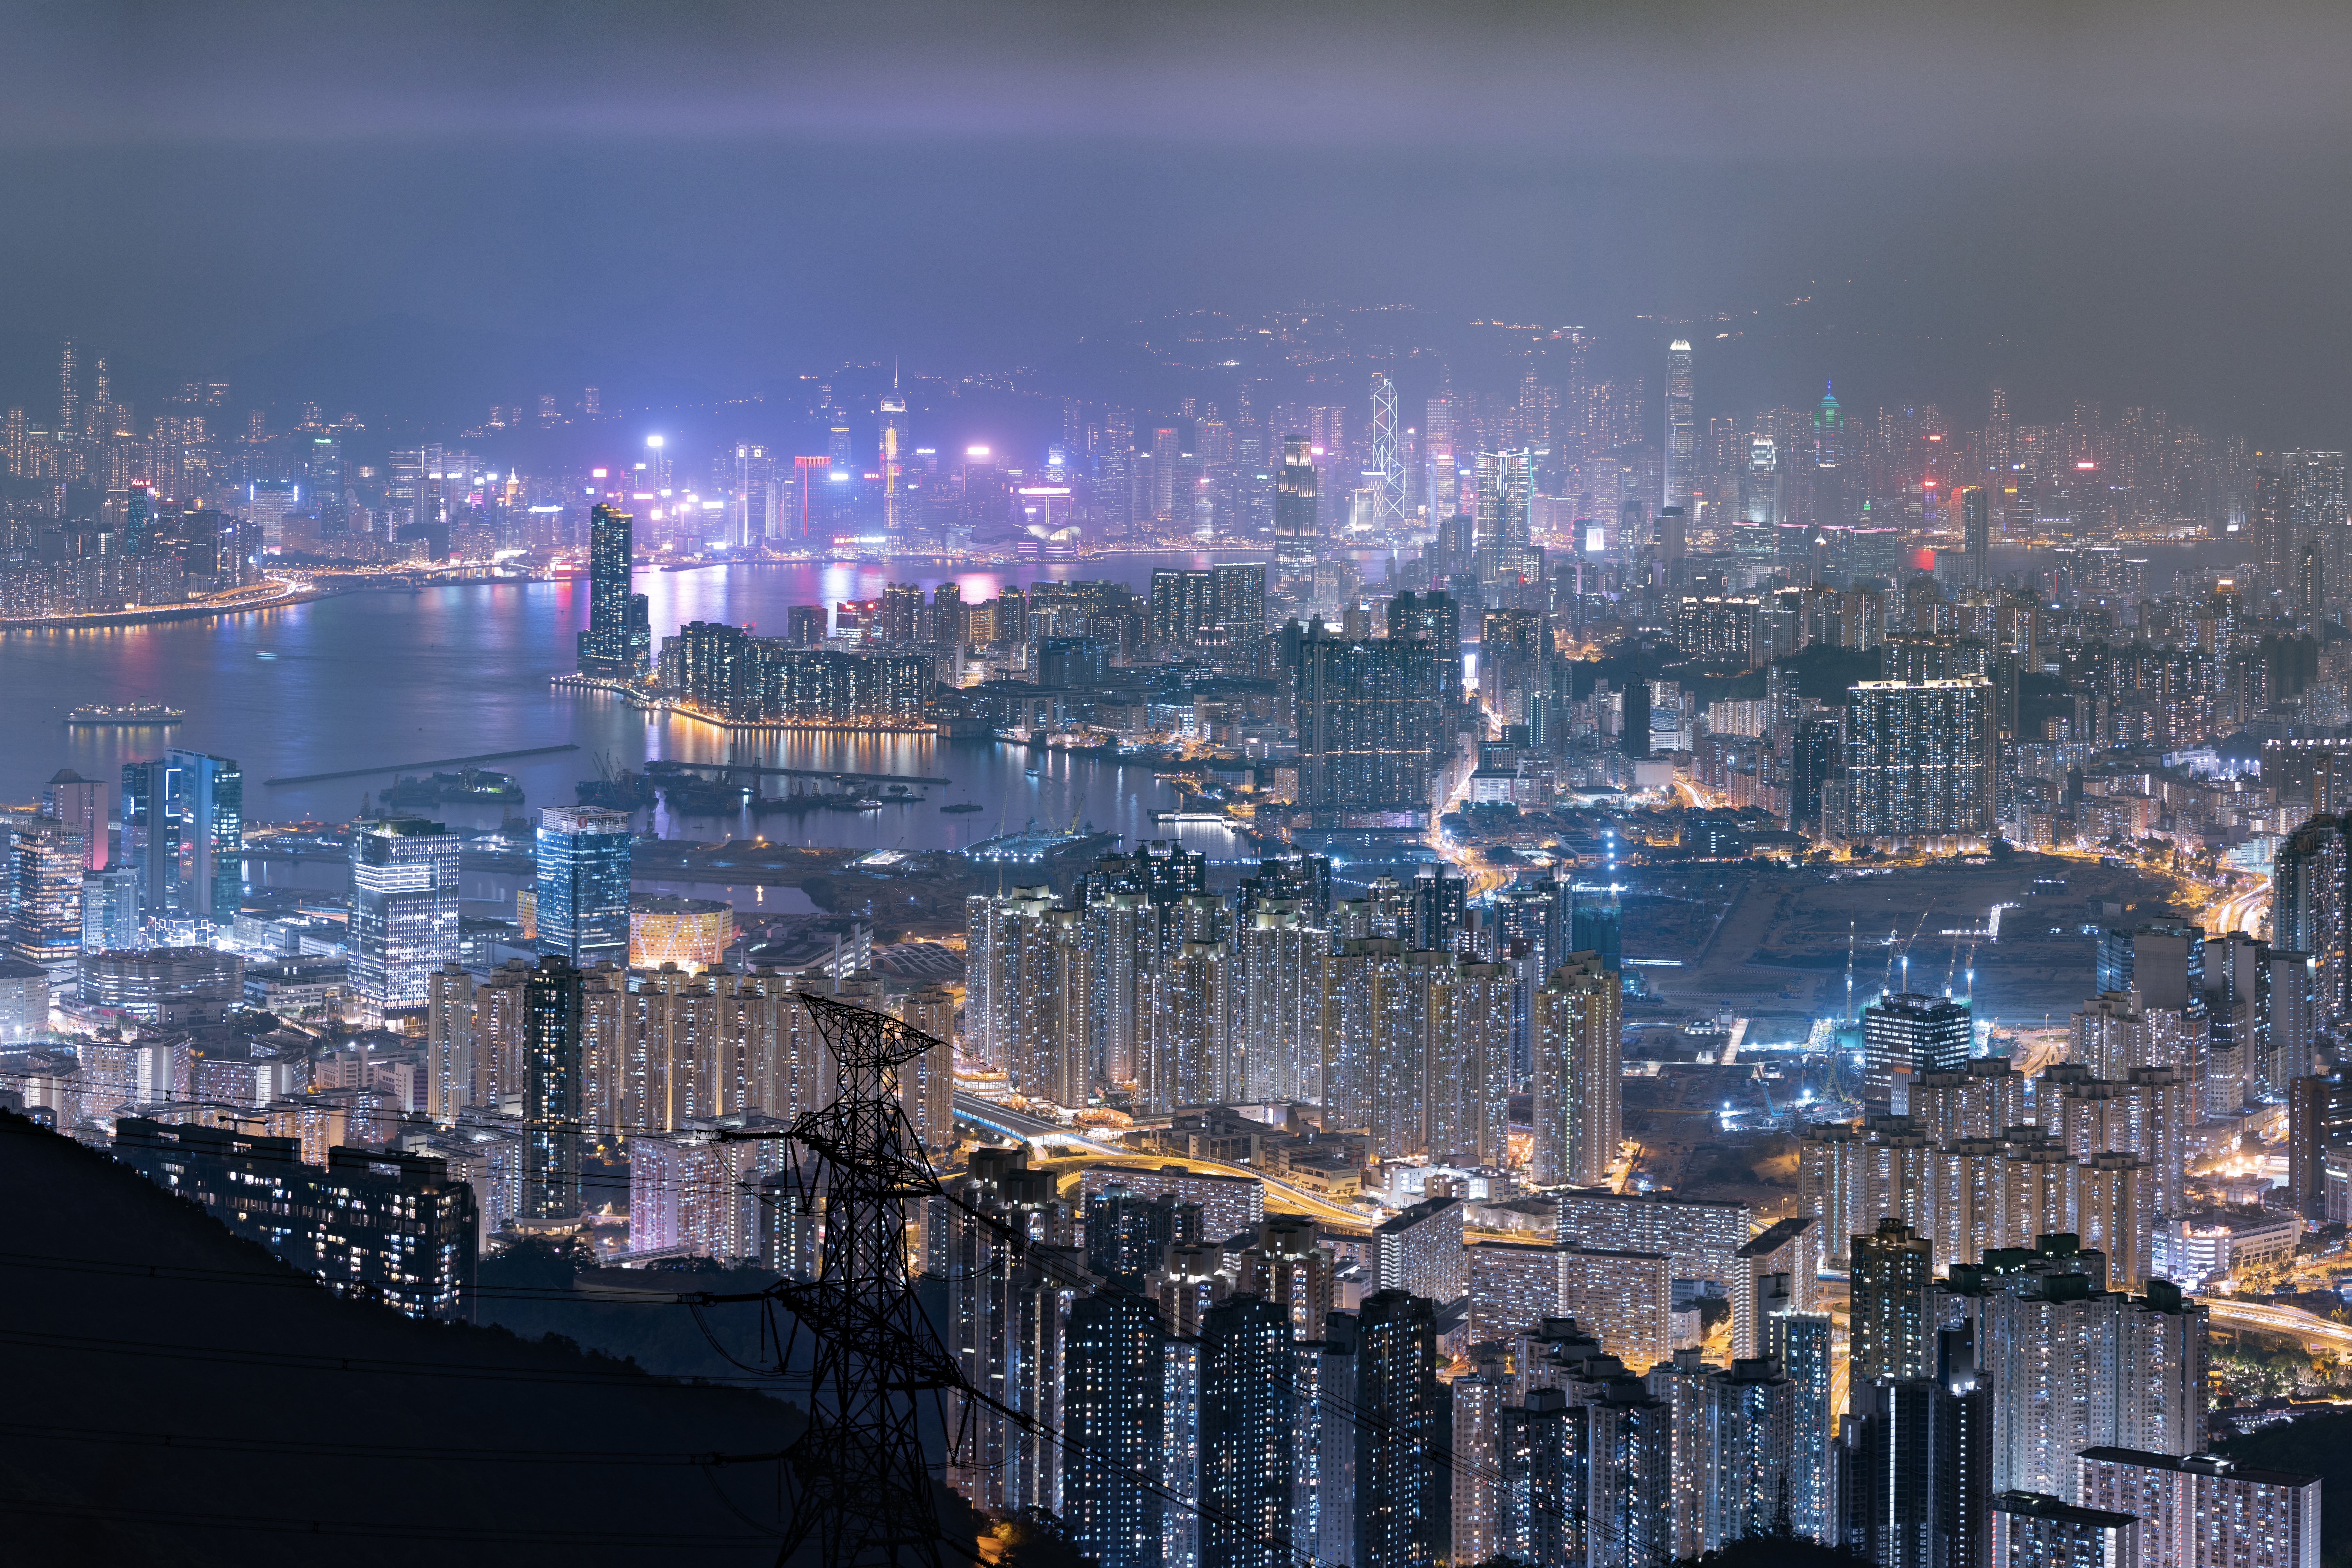 get stunning views of the city's skyscrapers lighting up the harbour by night from kowloon peak